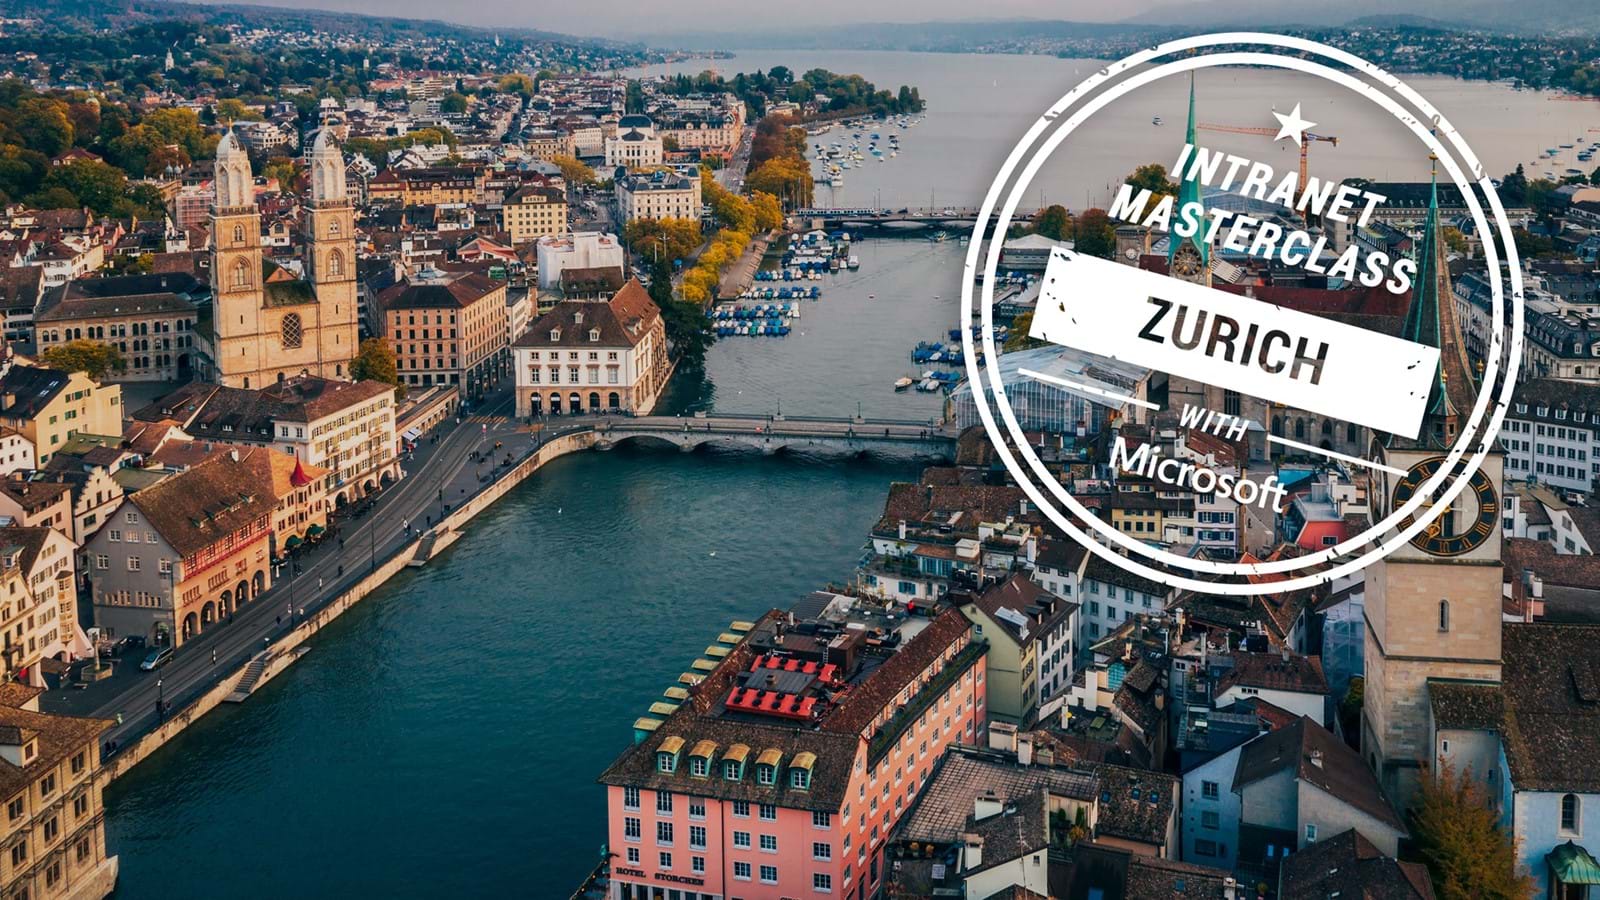 Unily's FREE Virtual Intranet Masterclass in Zurich